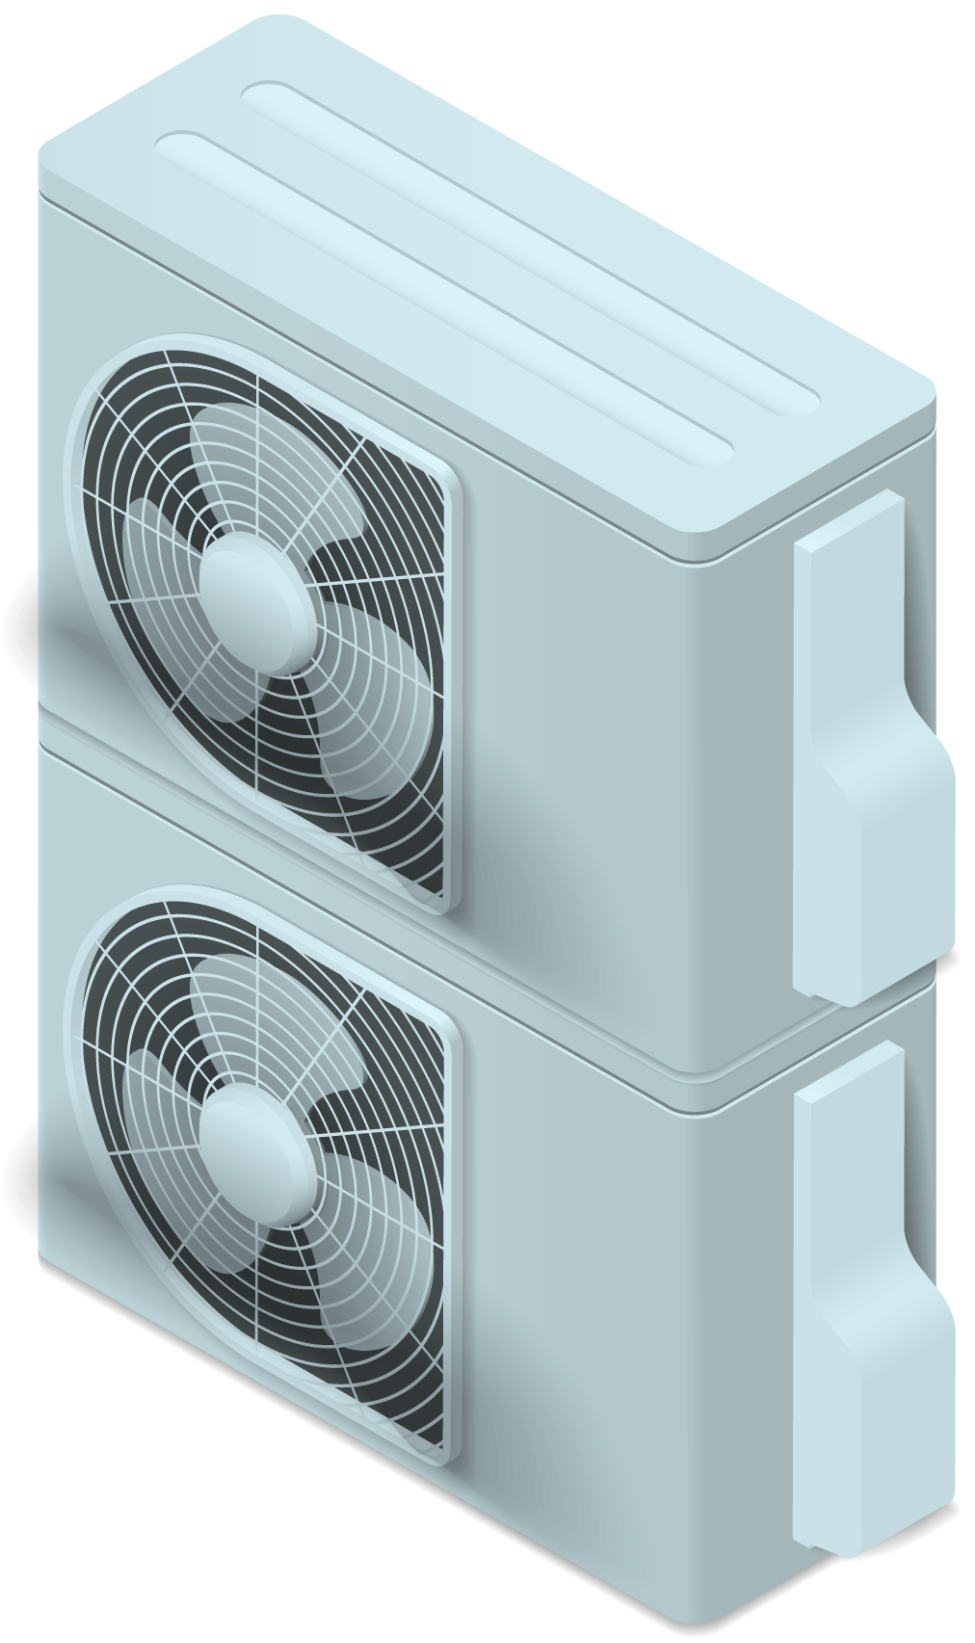 How dual heat pump systems work